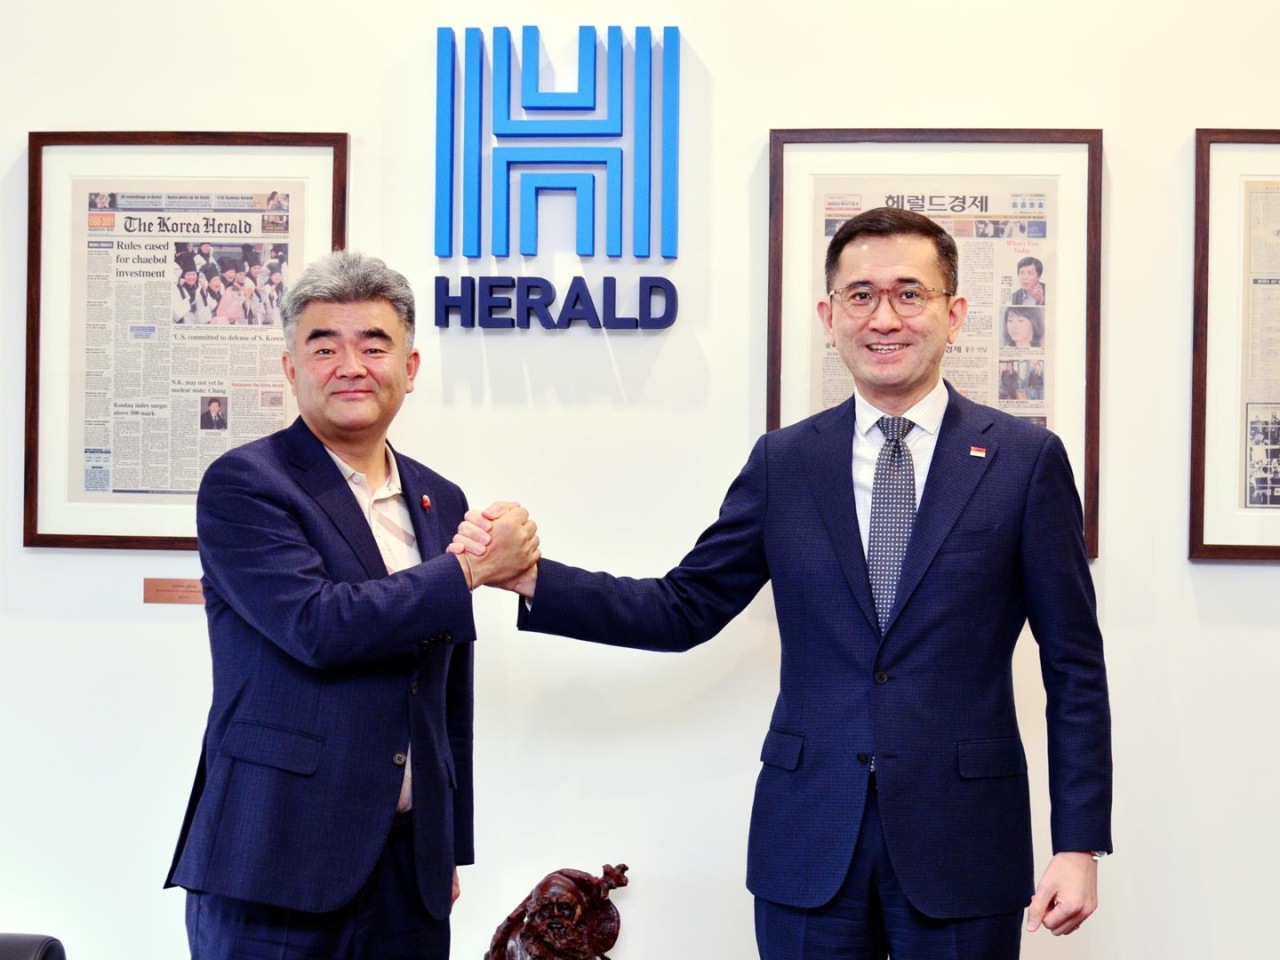 Eric Teo (right), the Singaporean ambassador to Korea, shakes hands with Herald Corp. Chairman Jung Won-ju during a courtesy visit to the Herald Corp. headquarters in central Seoul on Monday.(Park Hyun-koo/The Korea Herald)